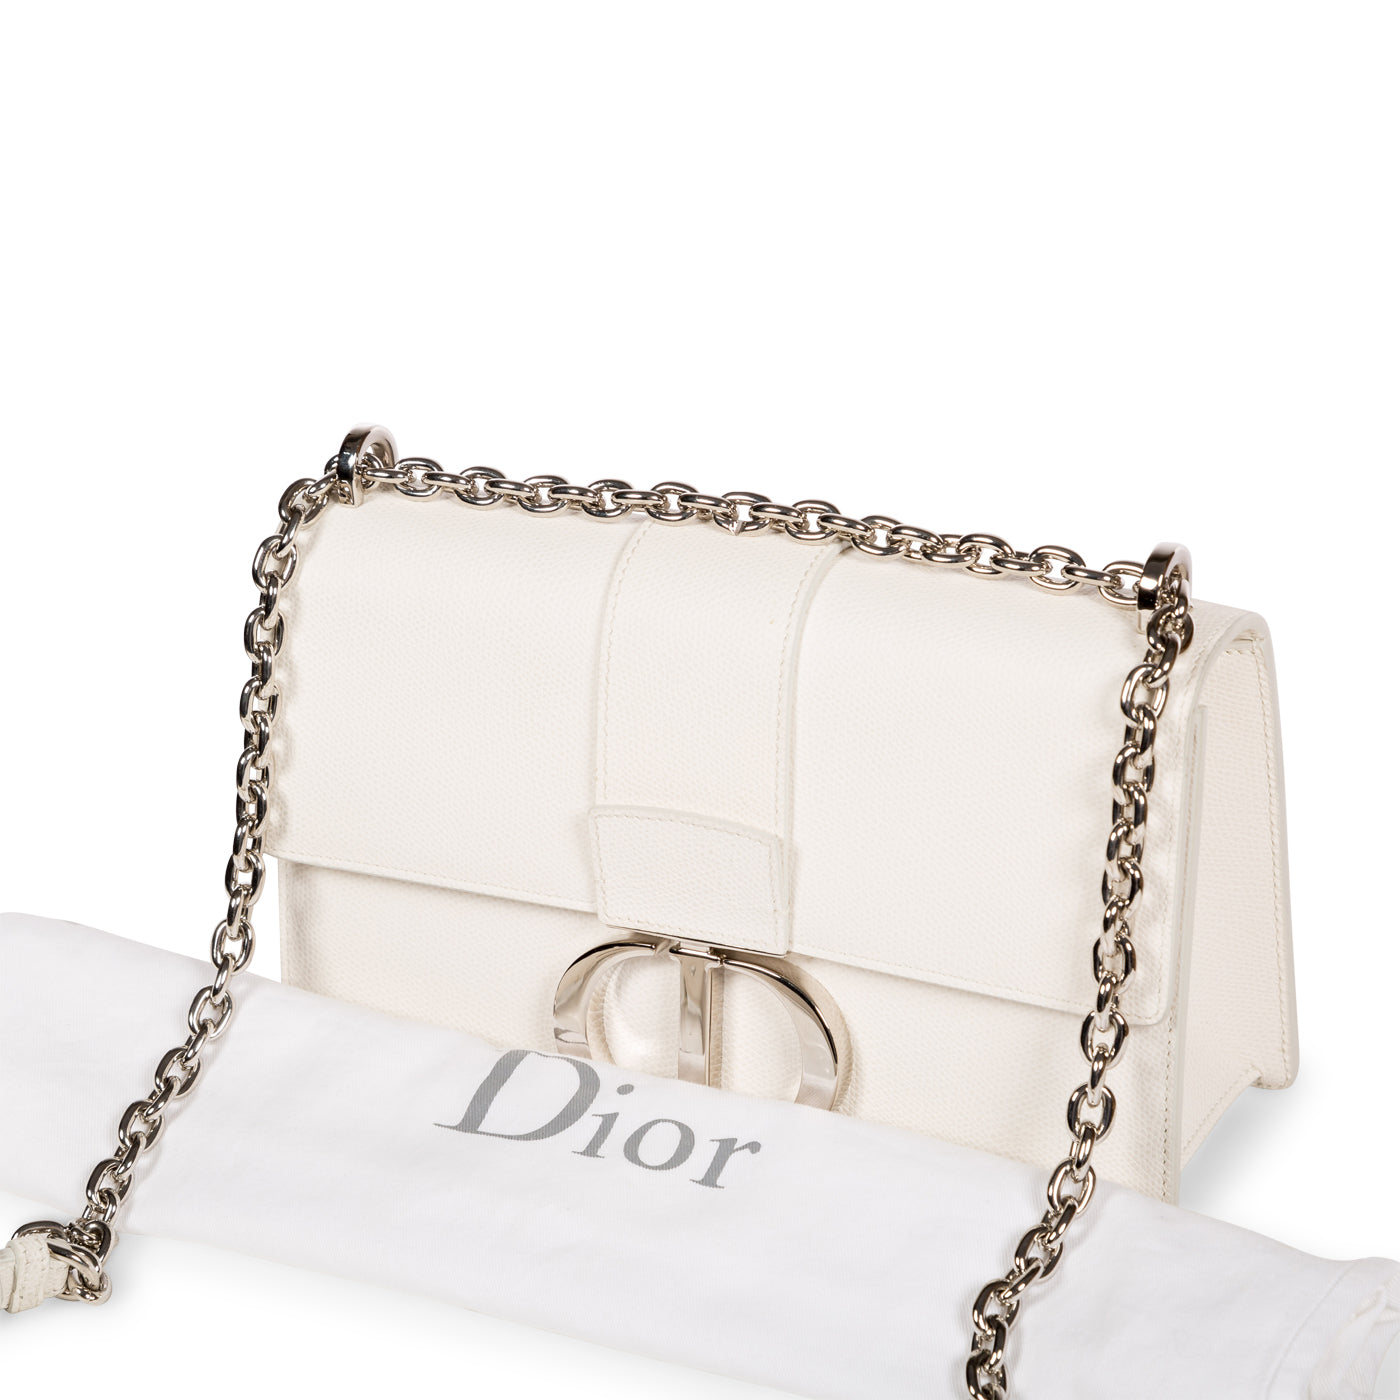 30 Montaigne Dior Bag  BlackWhiteOblique  Gallery posted by  etherealgift  Lemon8